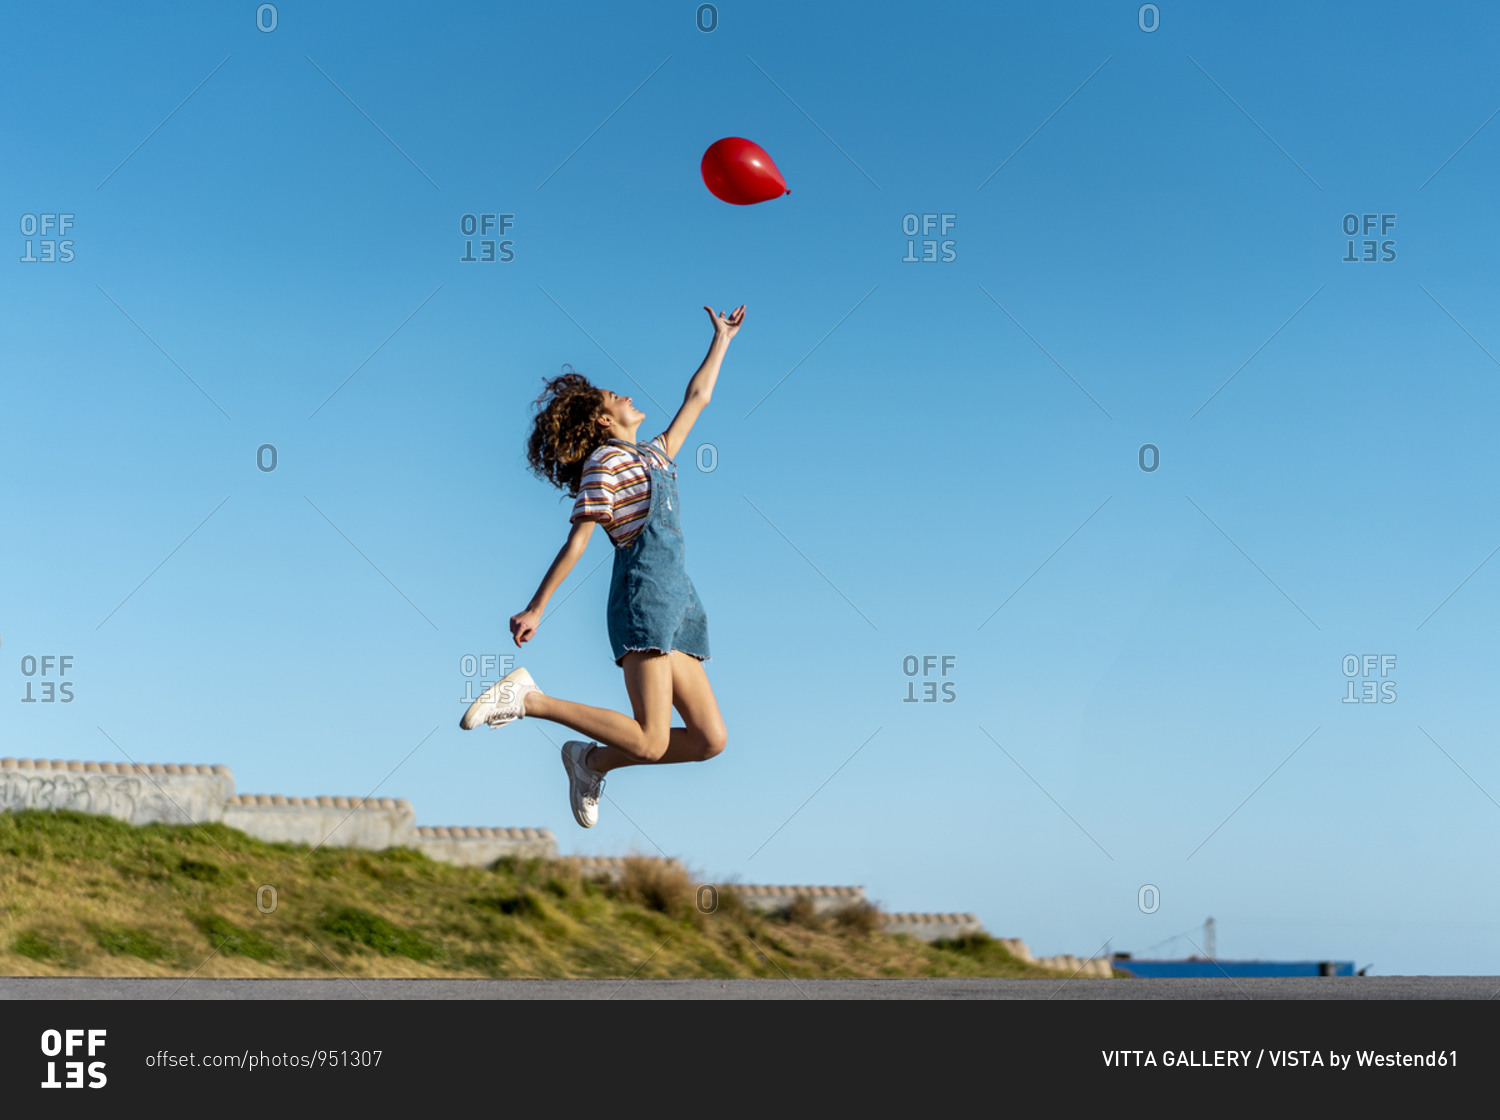 Jumping young woman- letting go of a red balloon